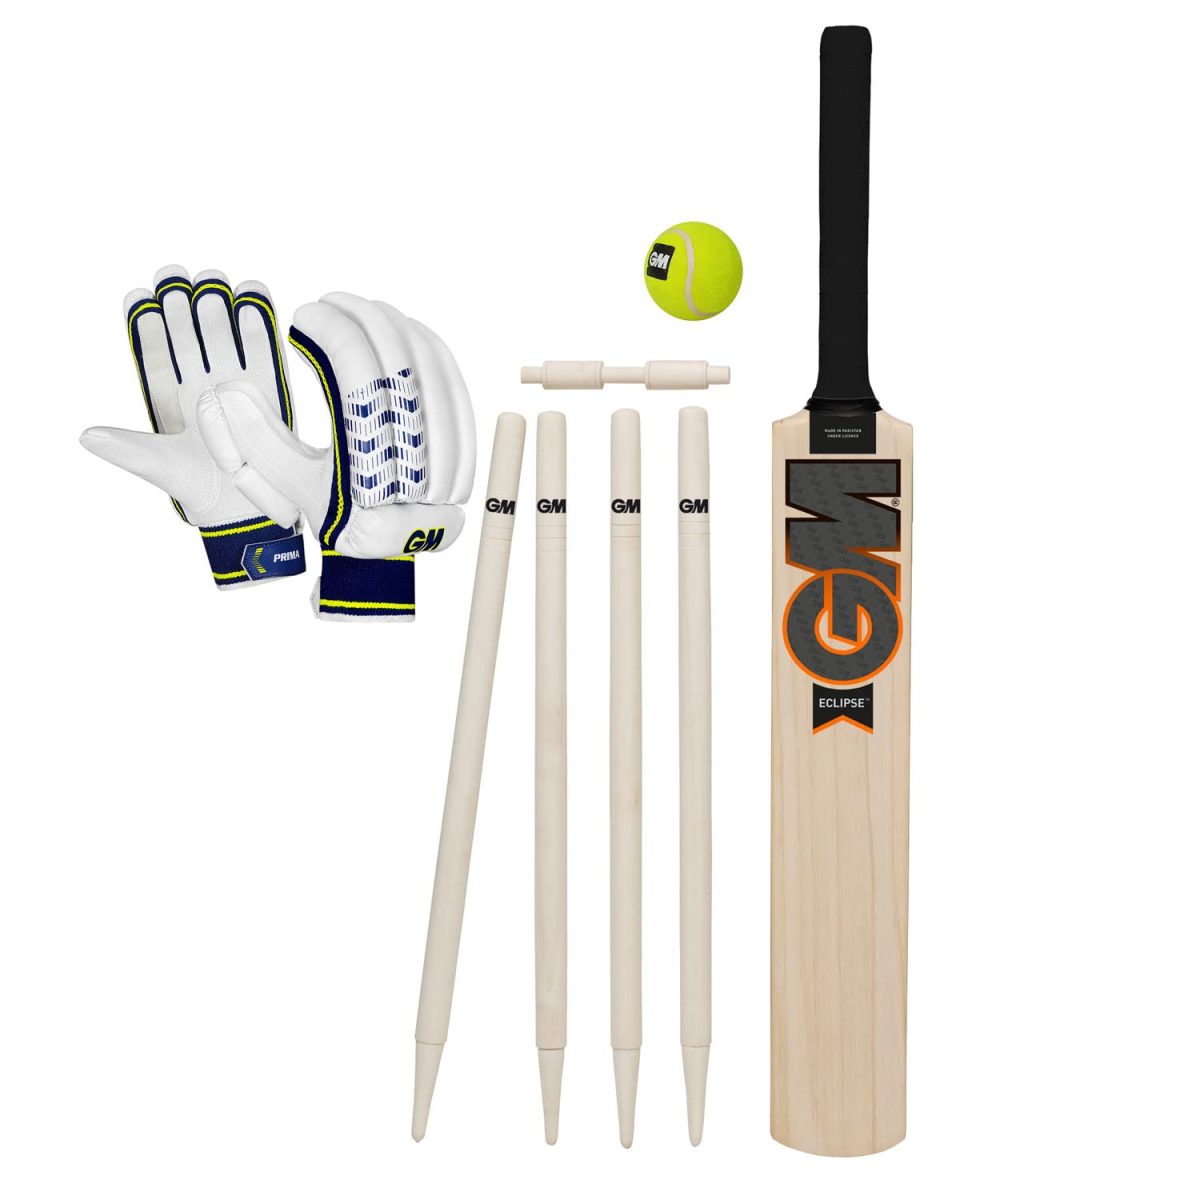 GM ECLIPSE CRICKET KITS ECONOMY (With Gloves) - S 6/5